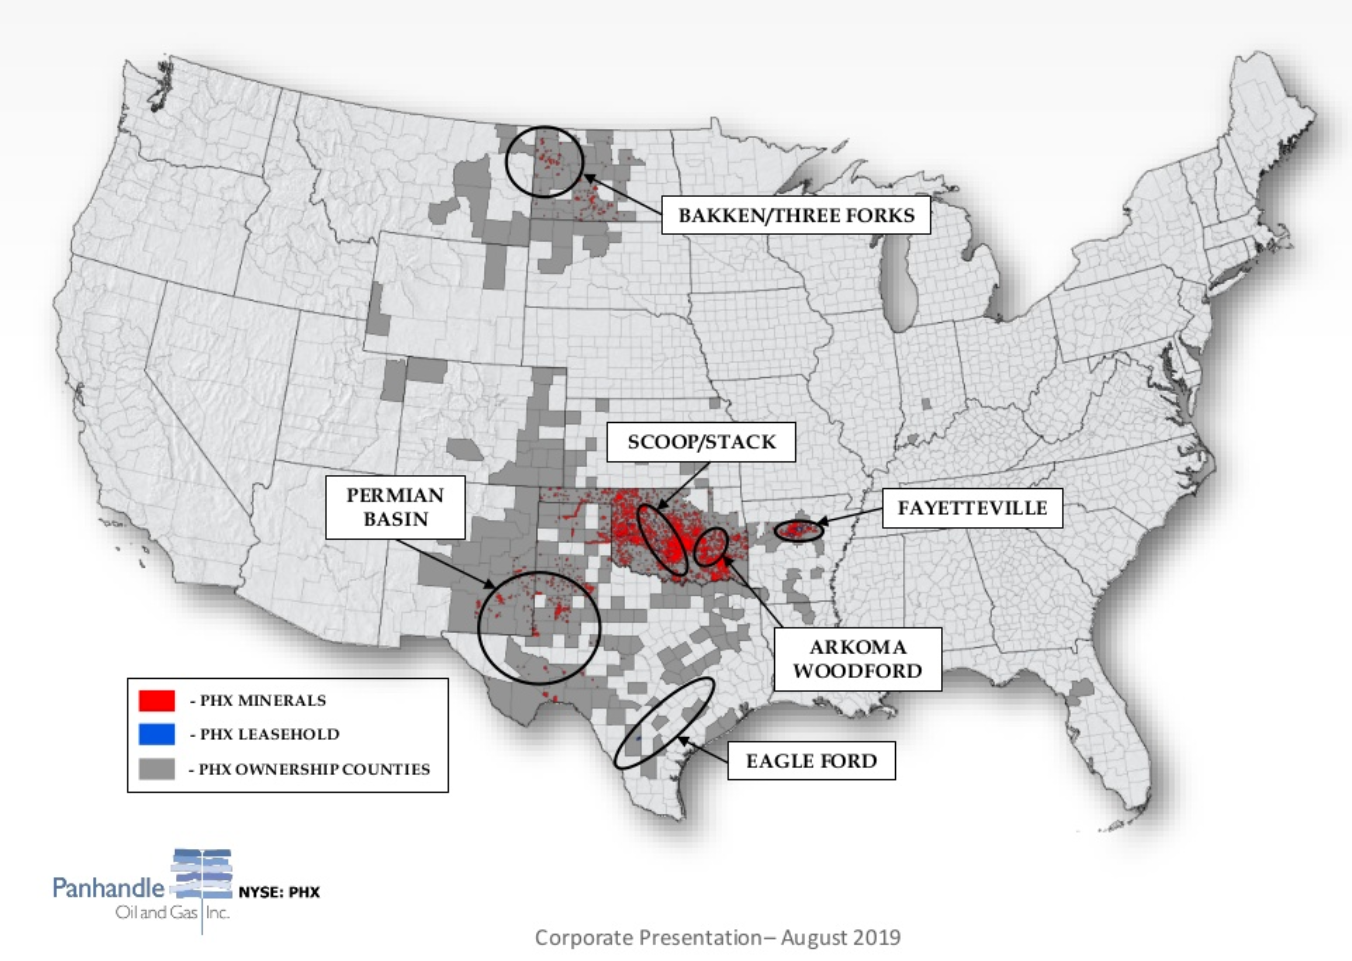 Panhandle Oil And Gas Mineral And Leasehold Asset Map (Source: Panhandle Oil and Gas Inc. August 2019 Corporate Presentation)